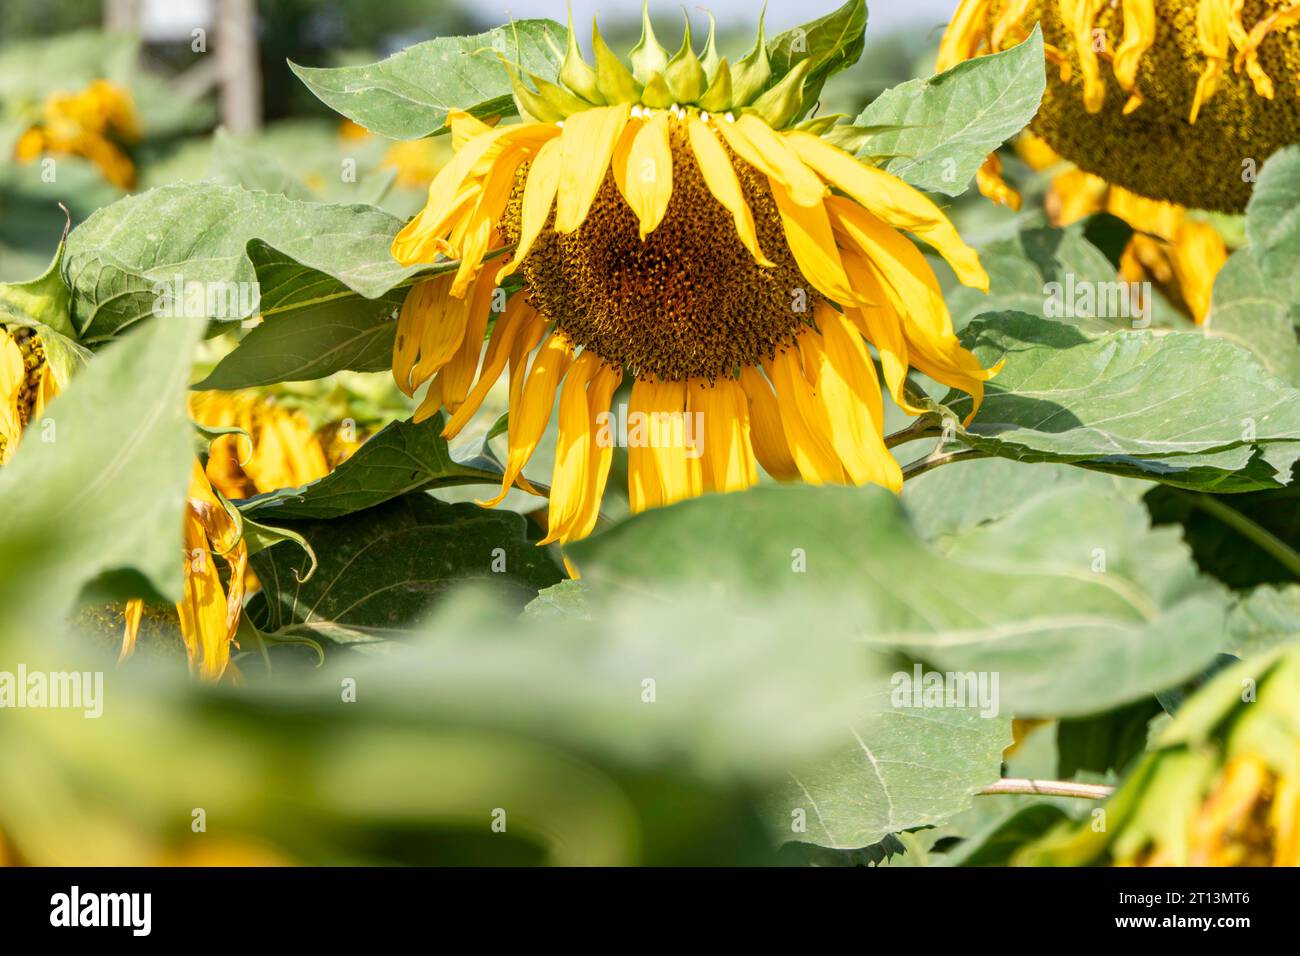 Ripe sunflowers stand tall in a golden field, creating a stunning view Stock Photo